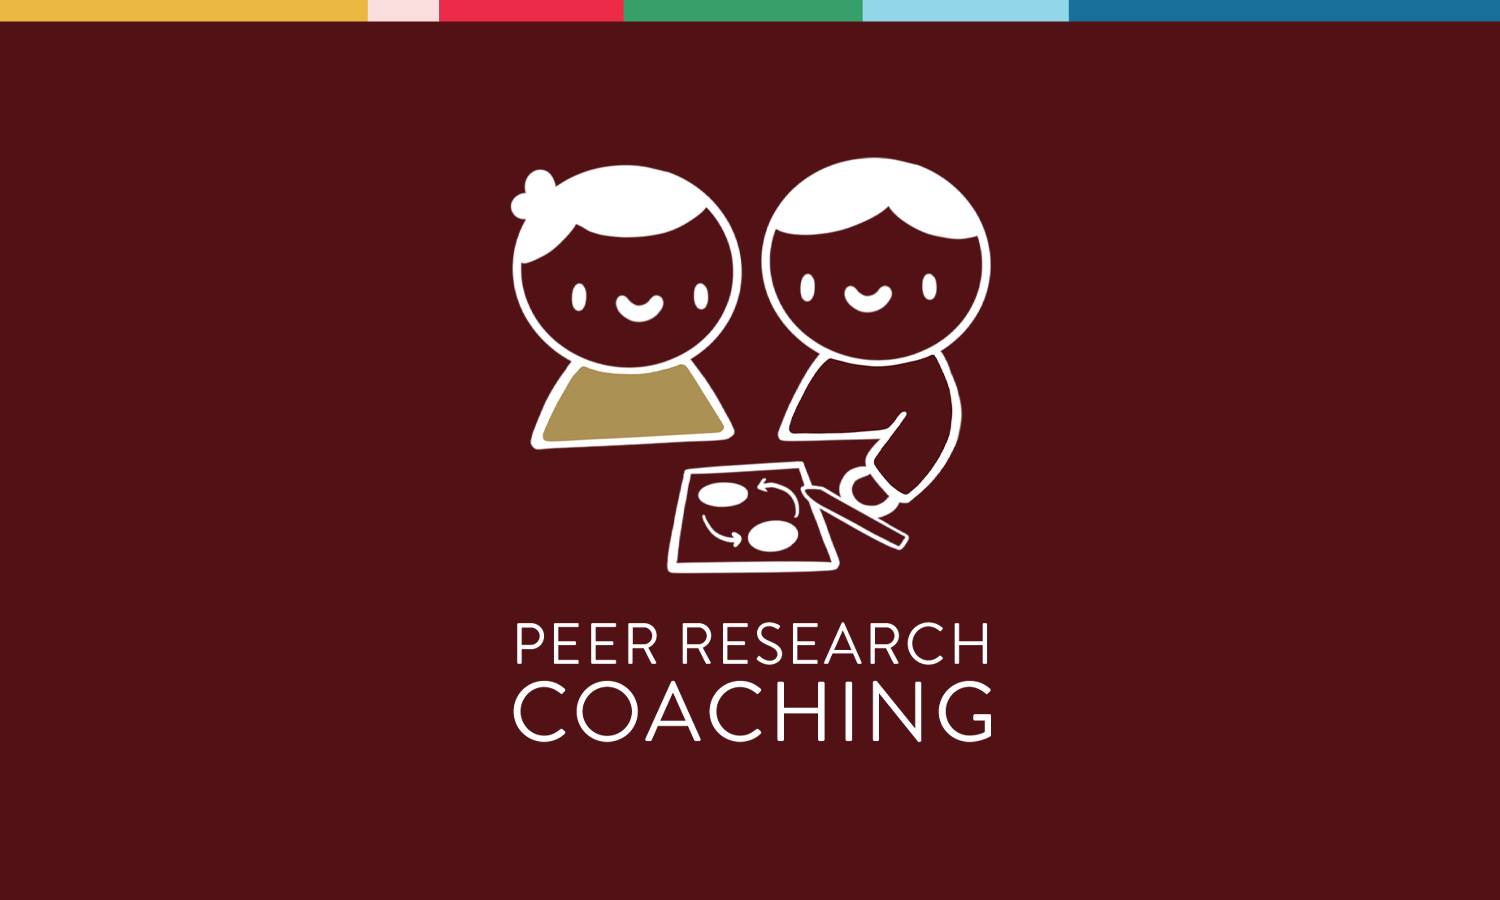 Illustration with Peer Research Coaching in text